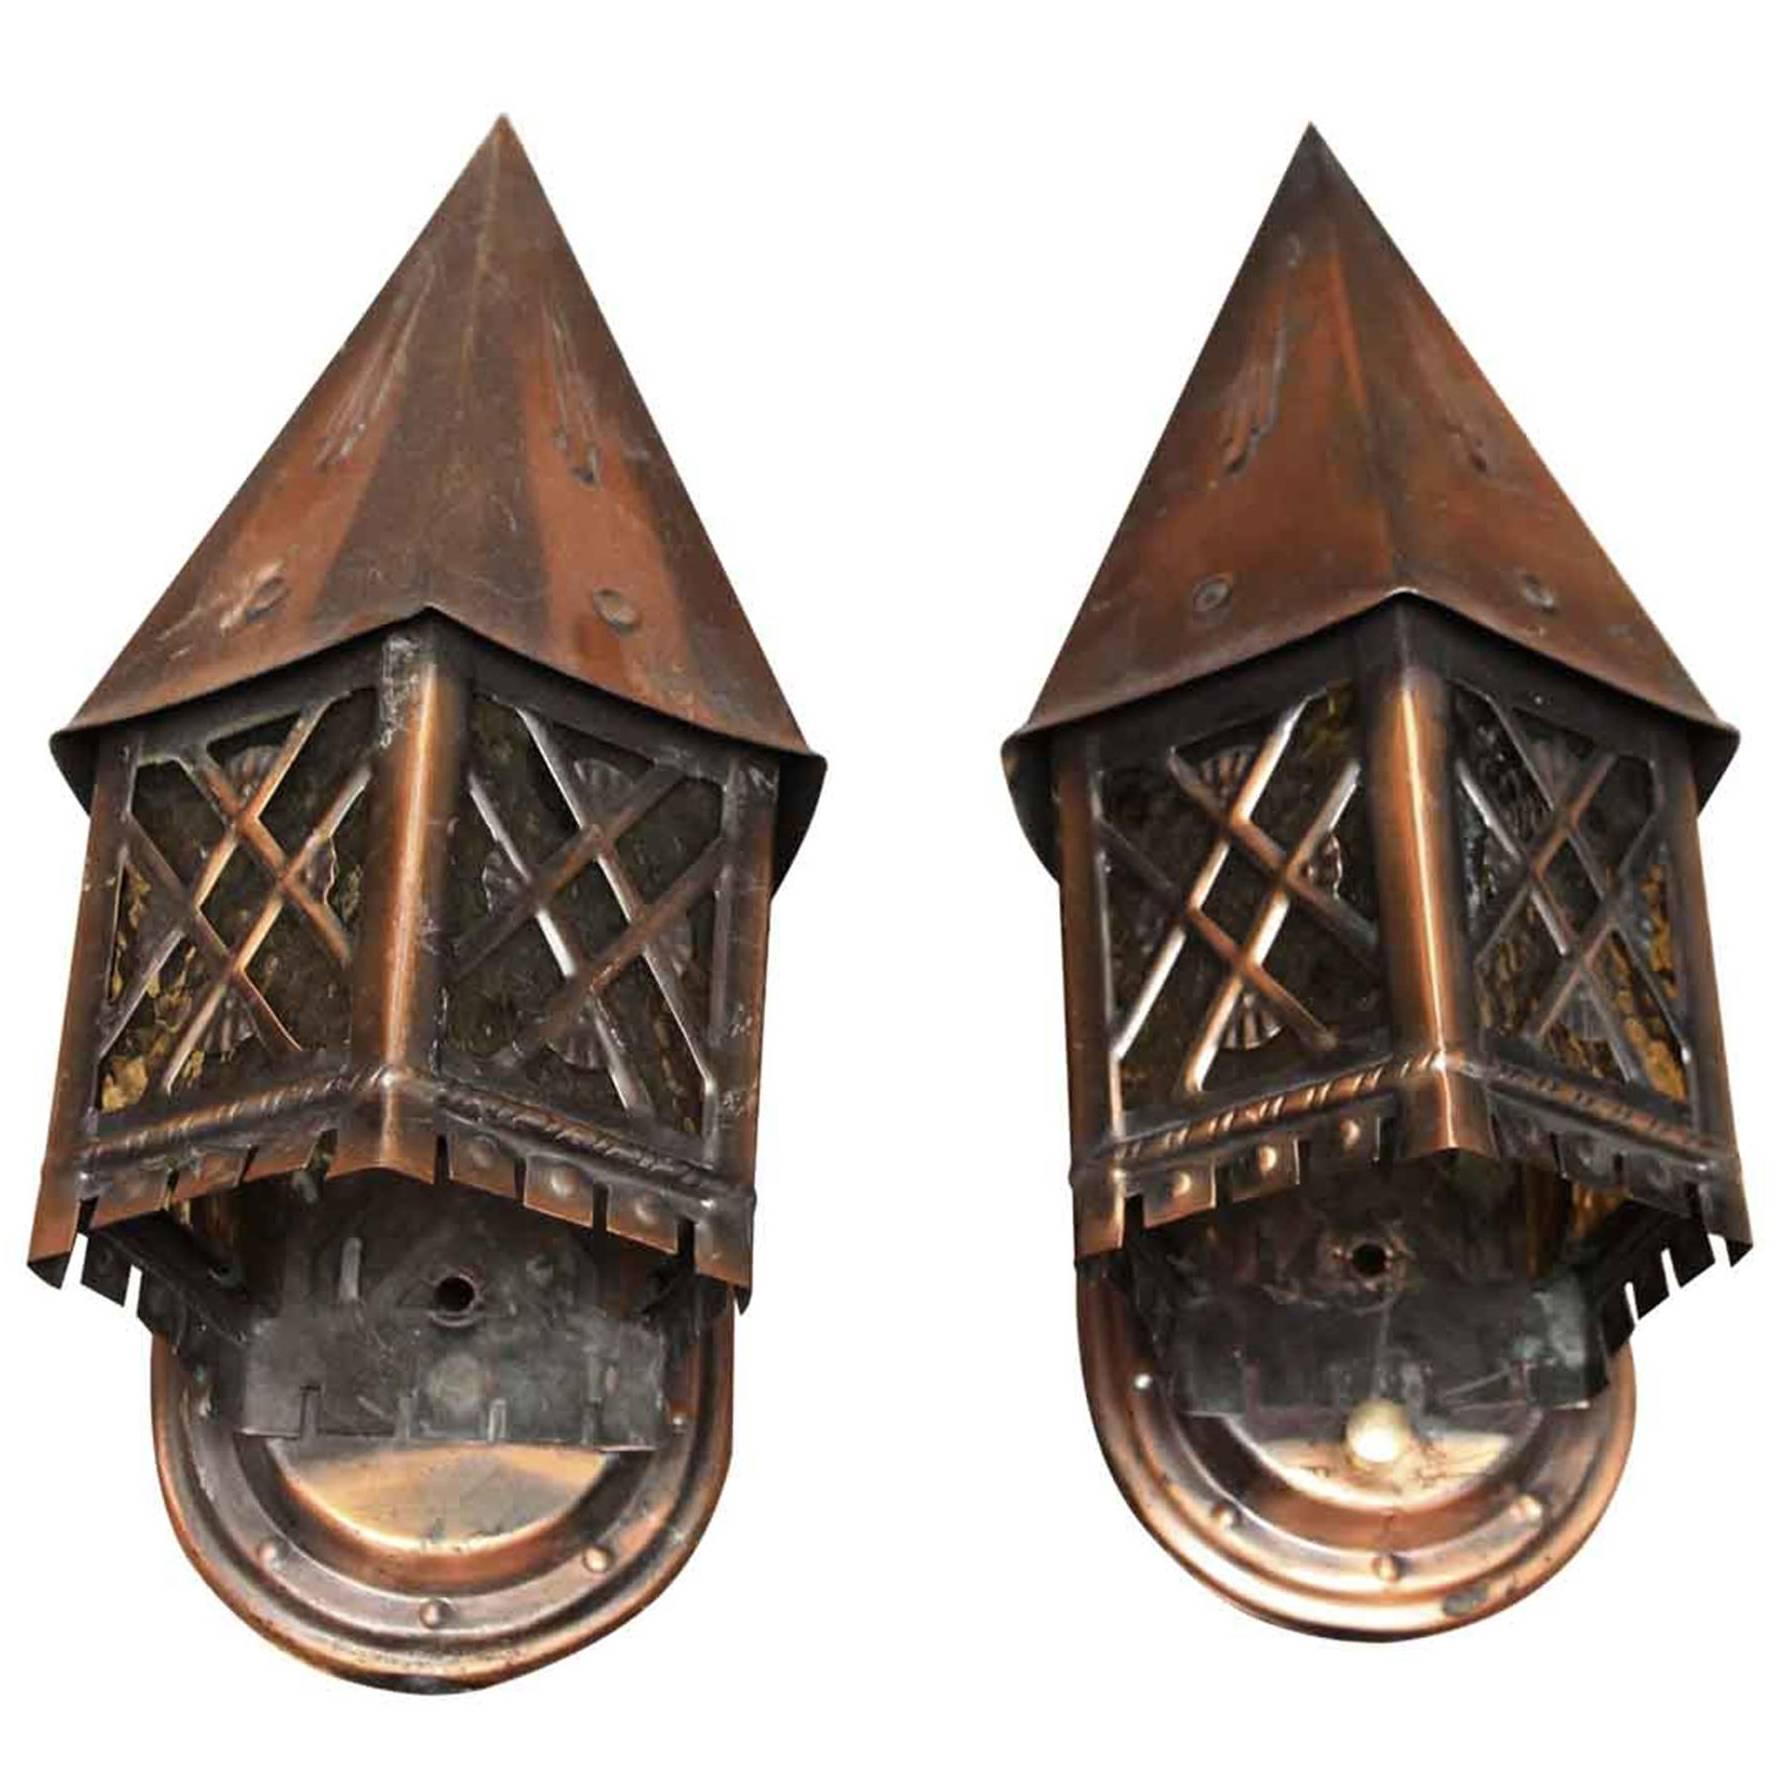 1940s Pair of Tudor Style Copper Lantern Sconces with Textured Glass